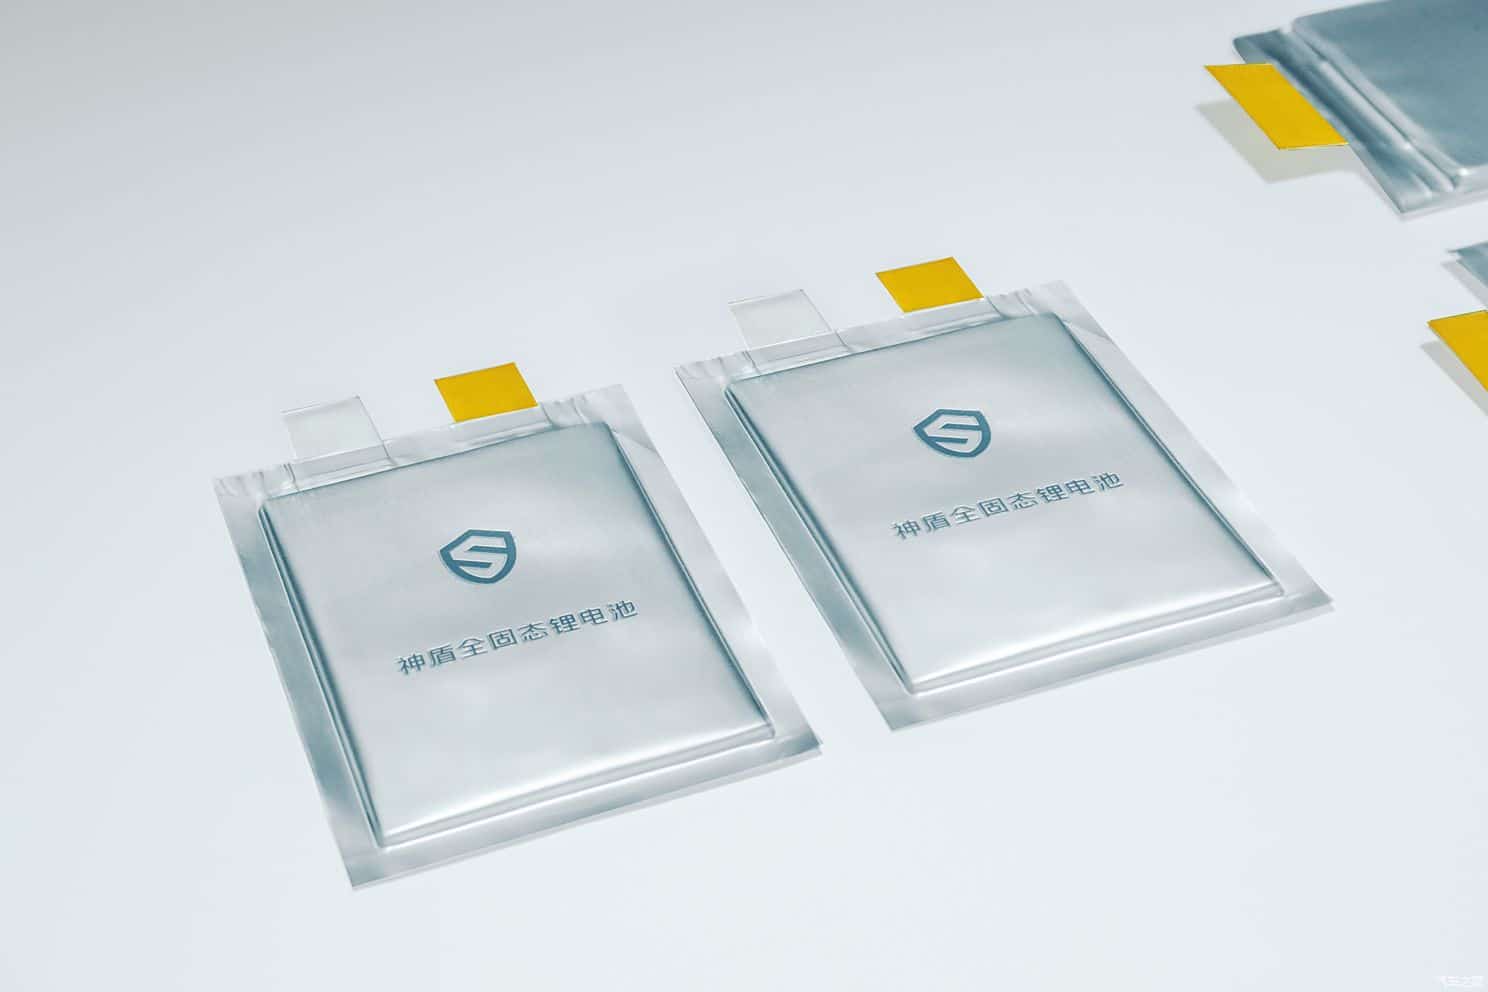 Geely debuts new generation 192Wh/kg Aegis lithium iron phosphate battery